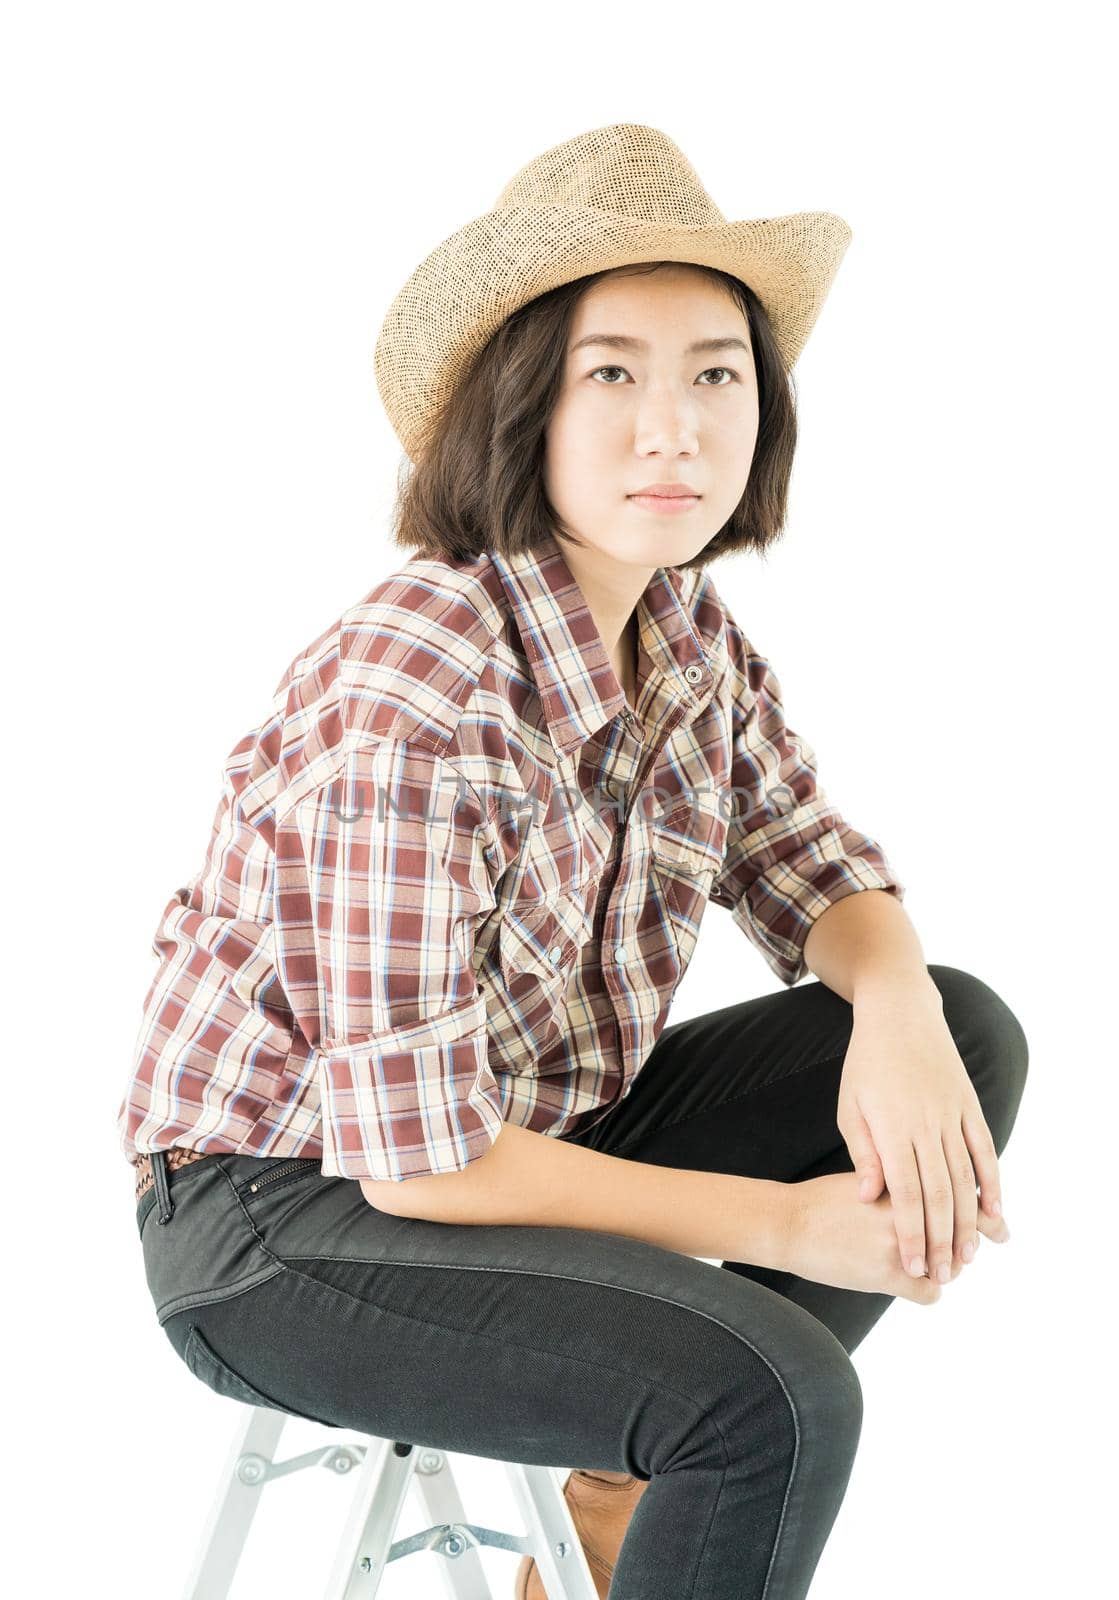 Young woman in a plaid shirt posing in studio on white background by stoonn